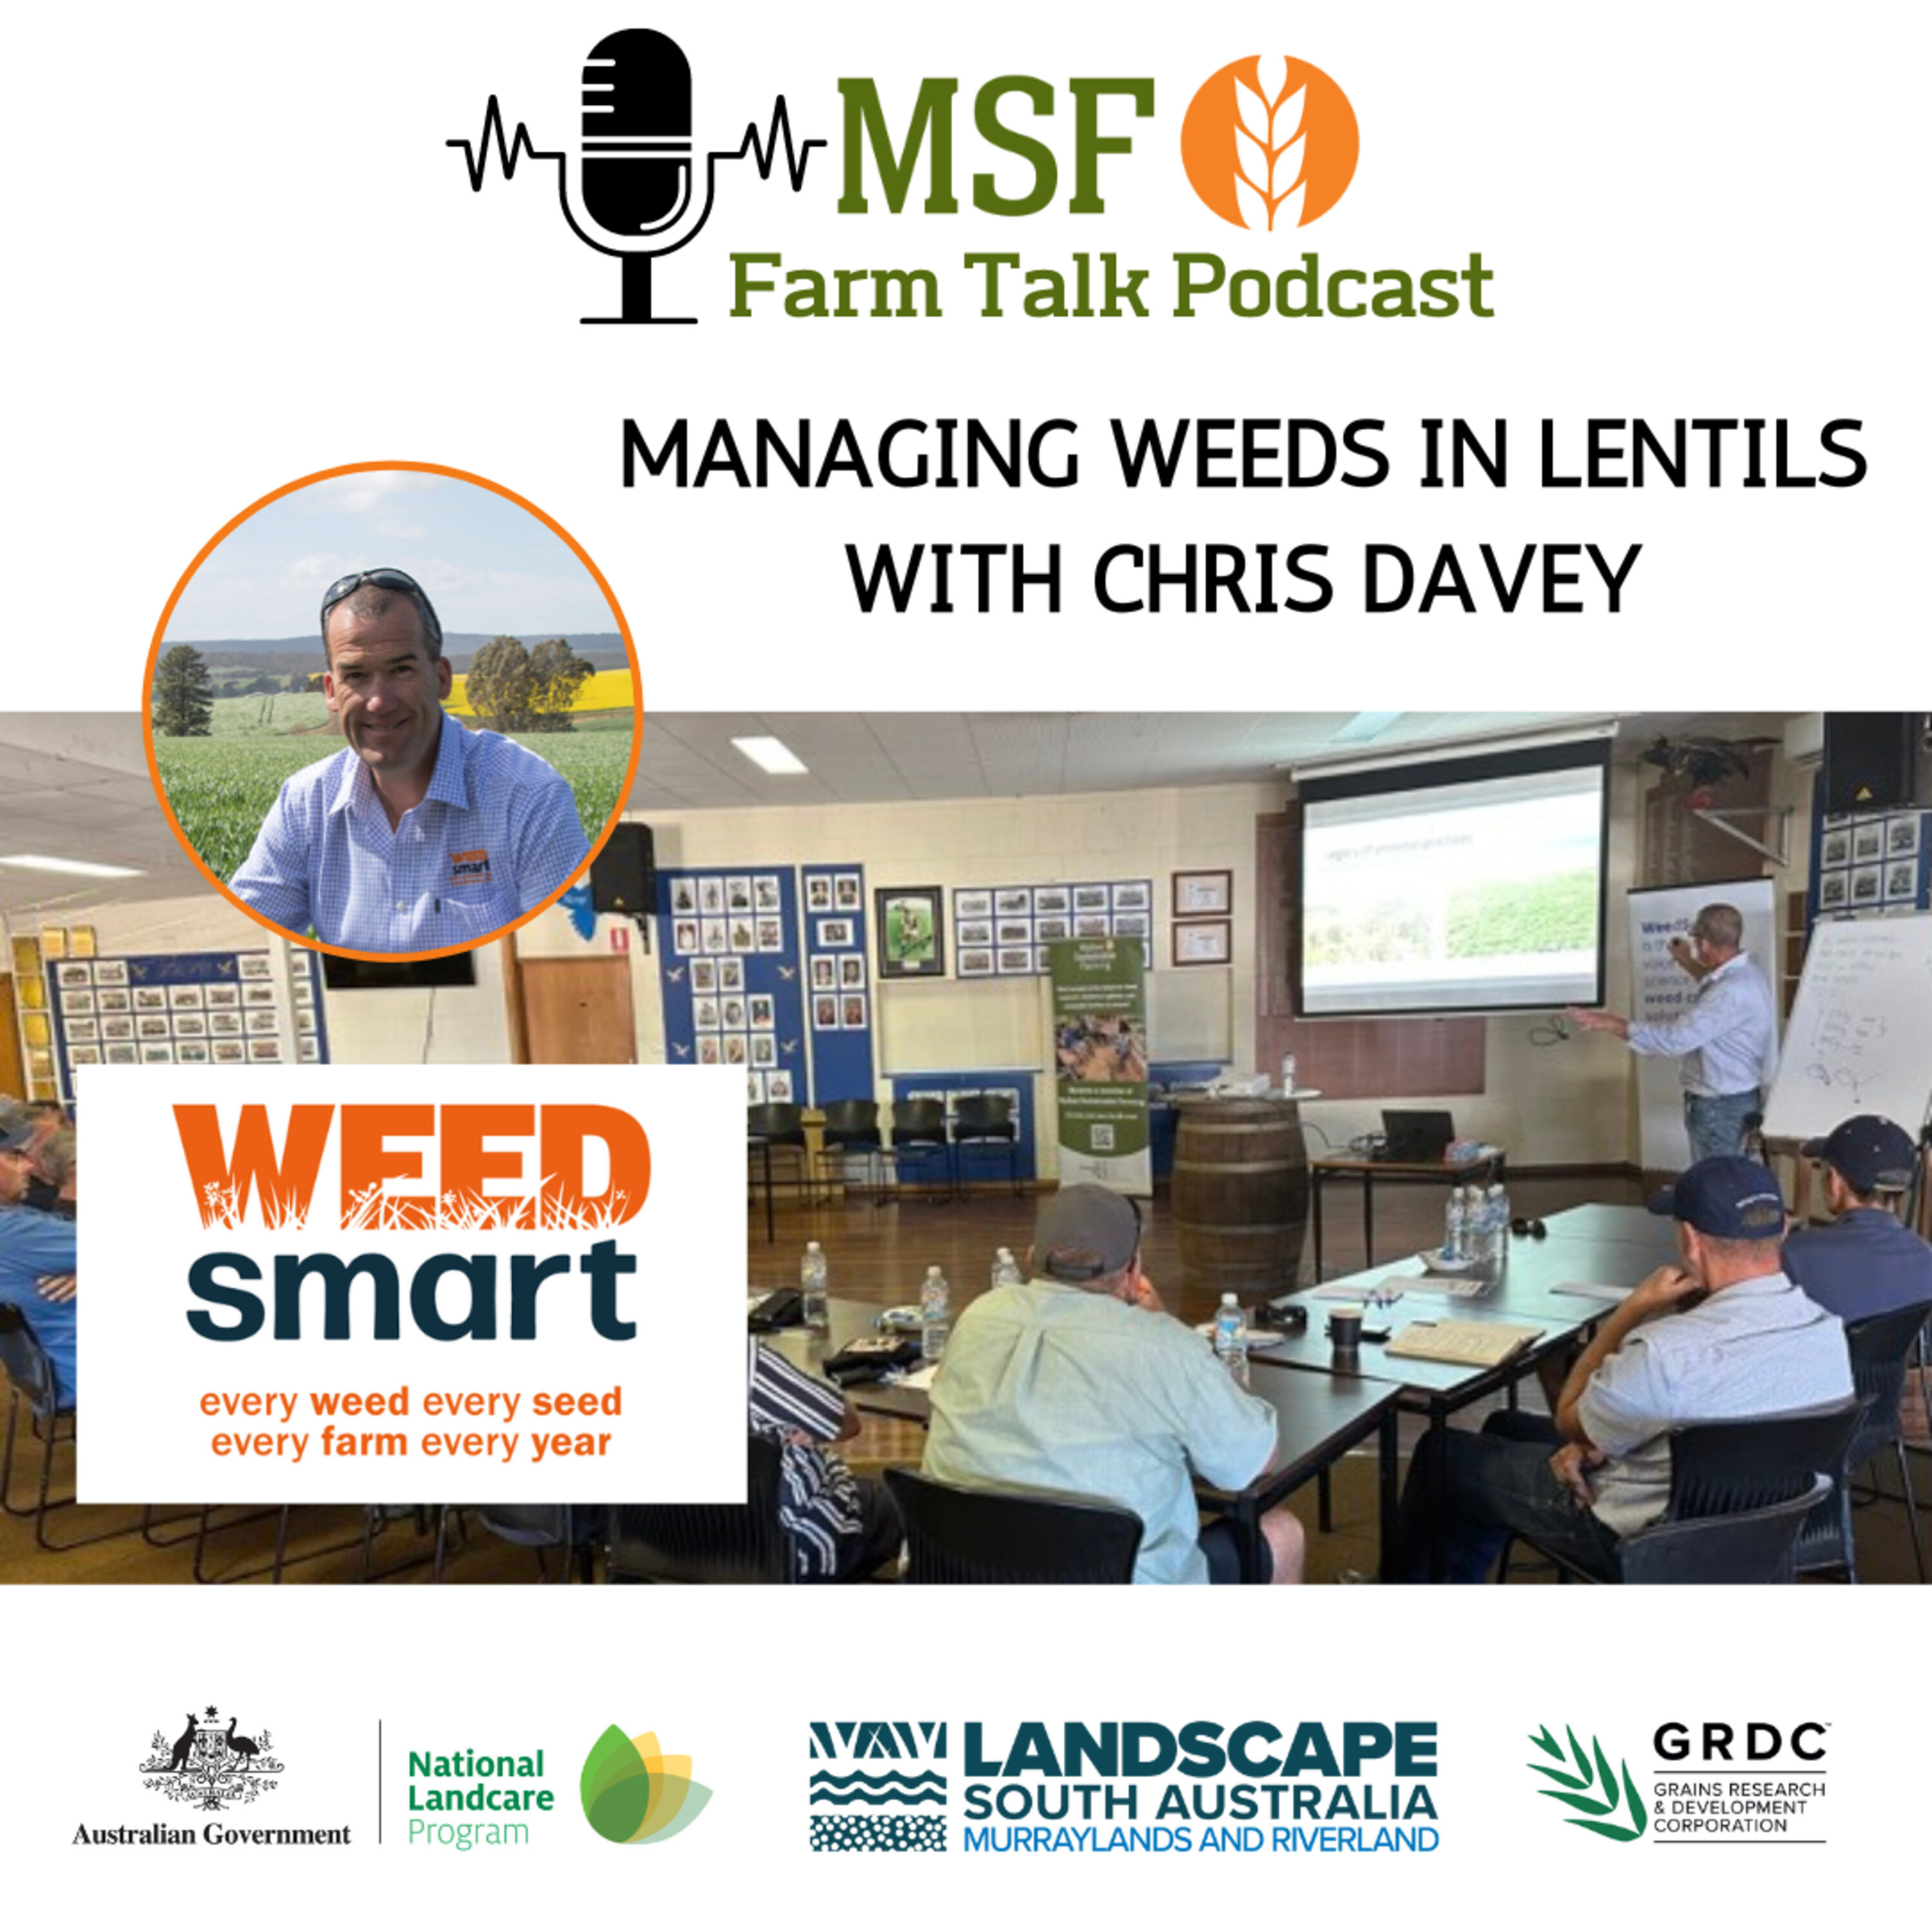 Managing weeds in lentils with Chris Davey, Weed Smart